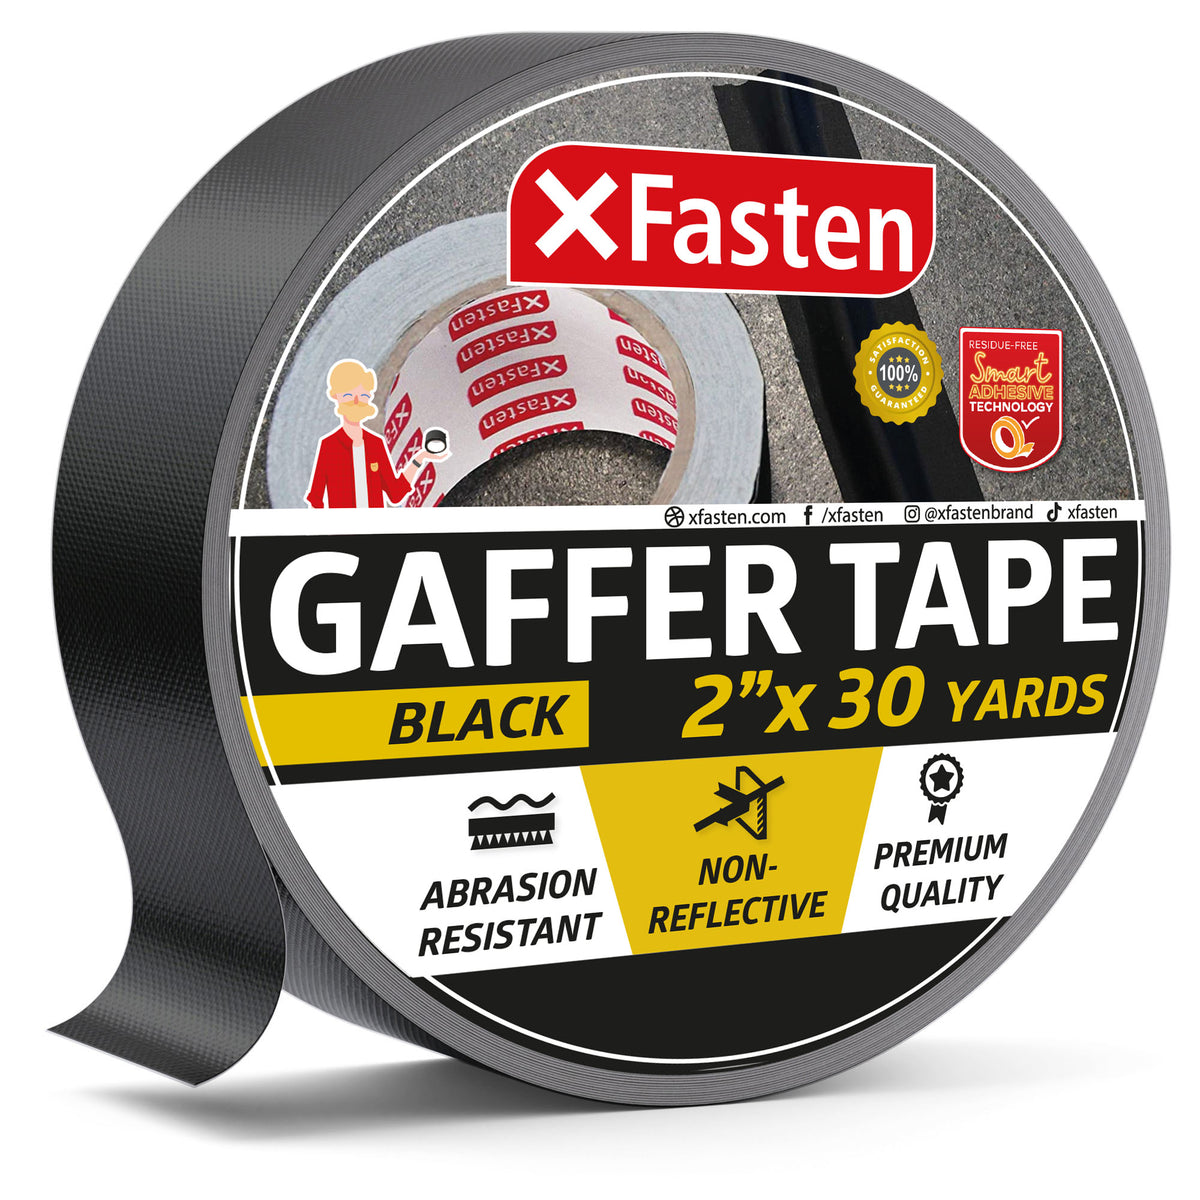 XFasten Duct Tape, White, 2-Inches x 35-Yards, Pack of 3 Yellowing Resistant and Conformable